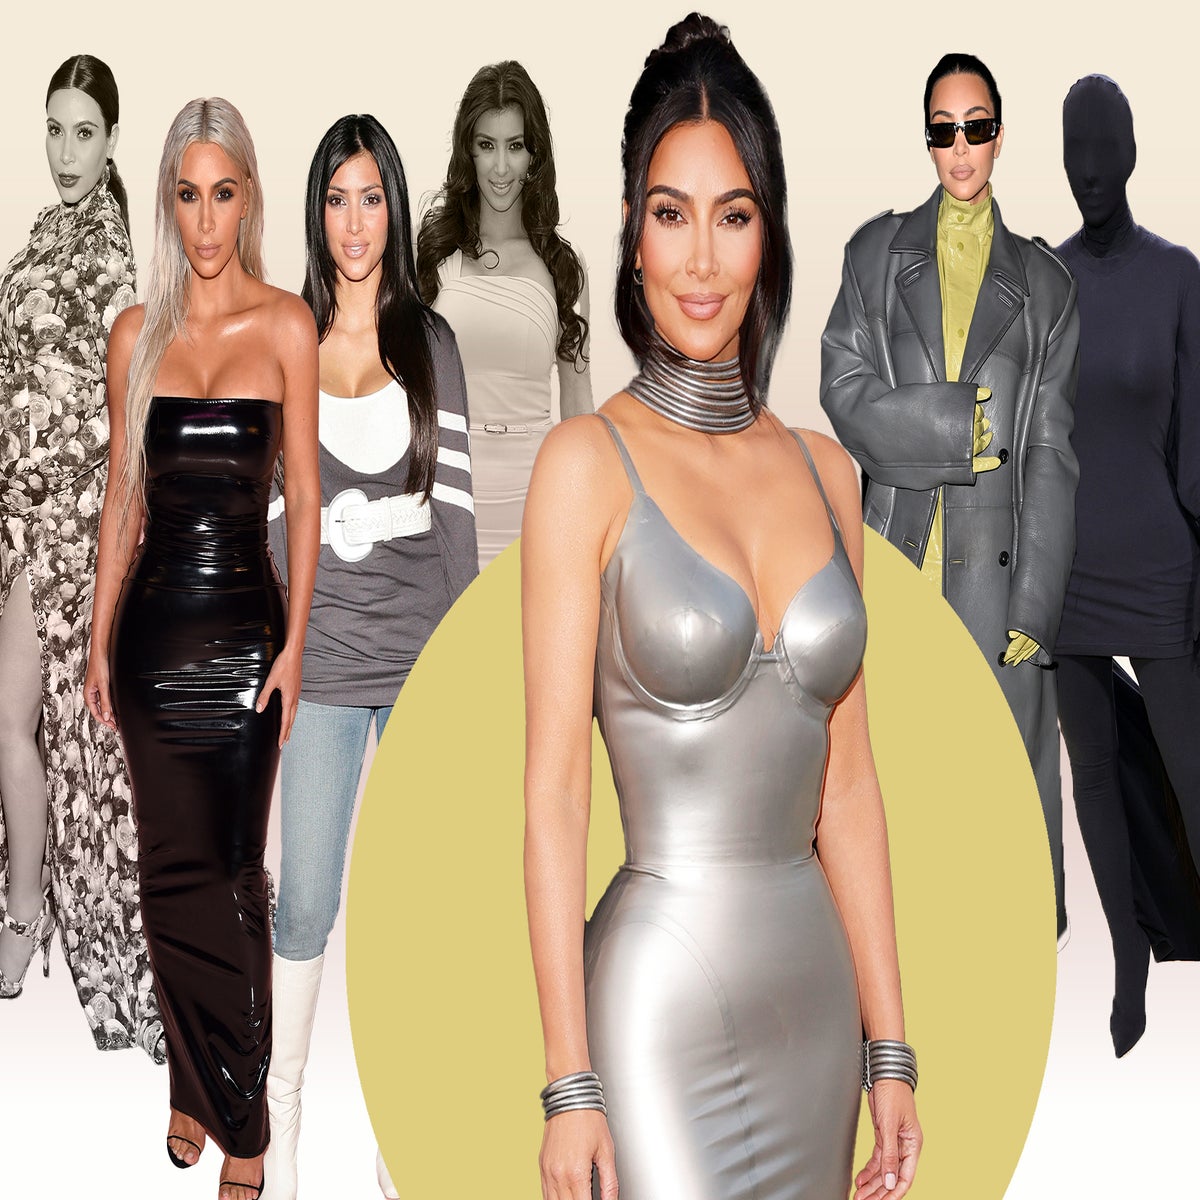 Kim Kardashian West at 40: Looking back at her style evolution on